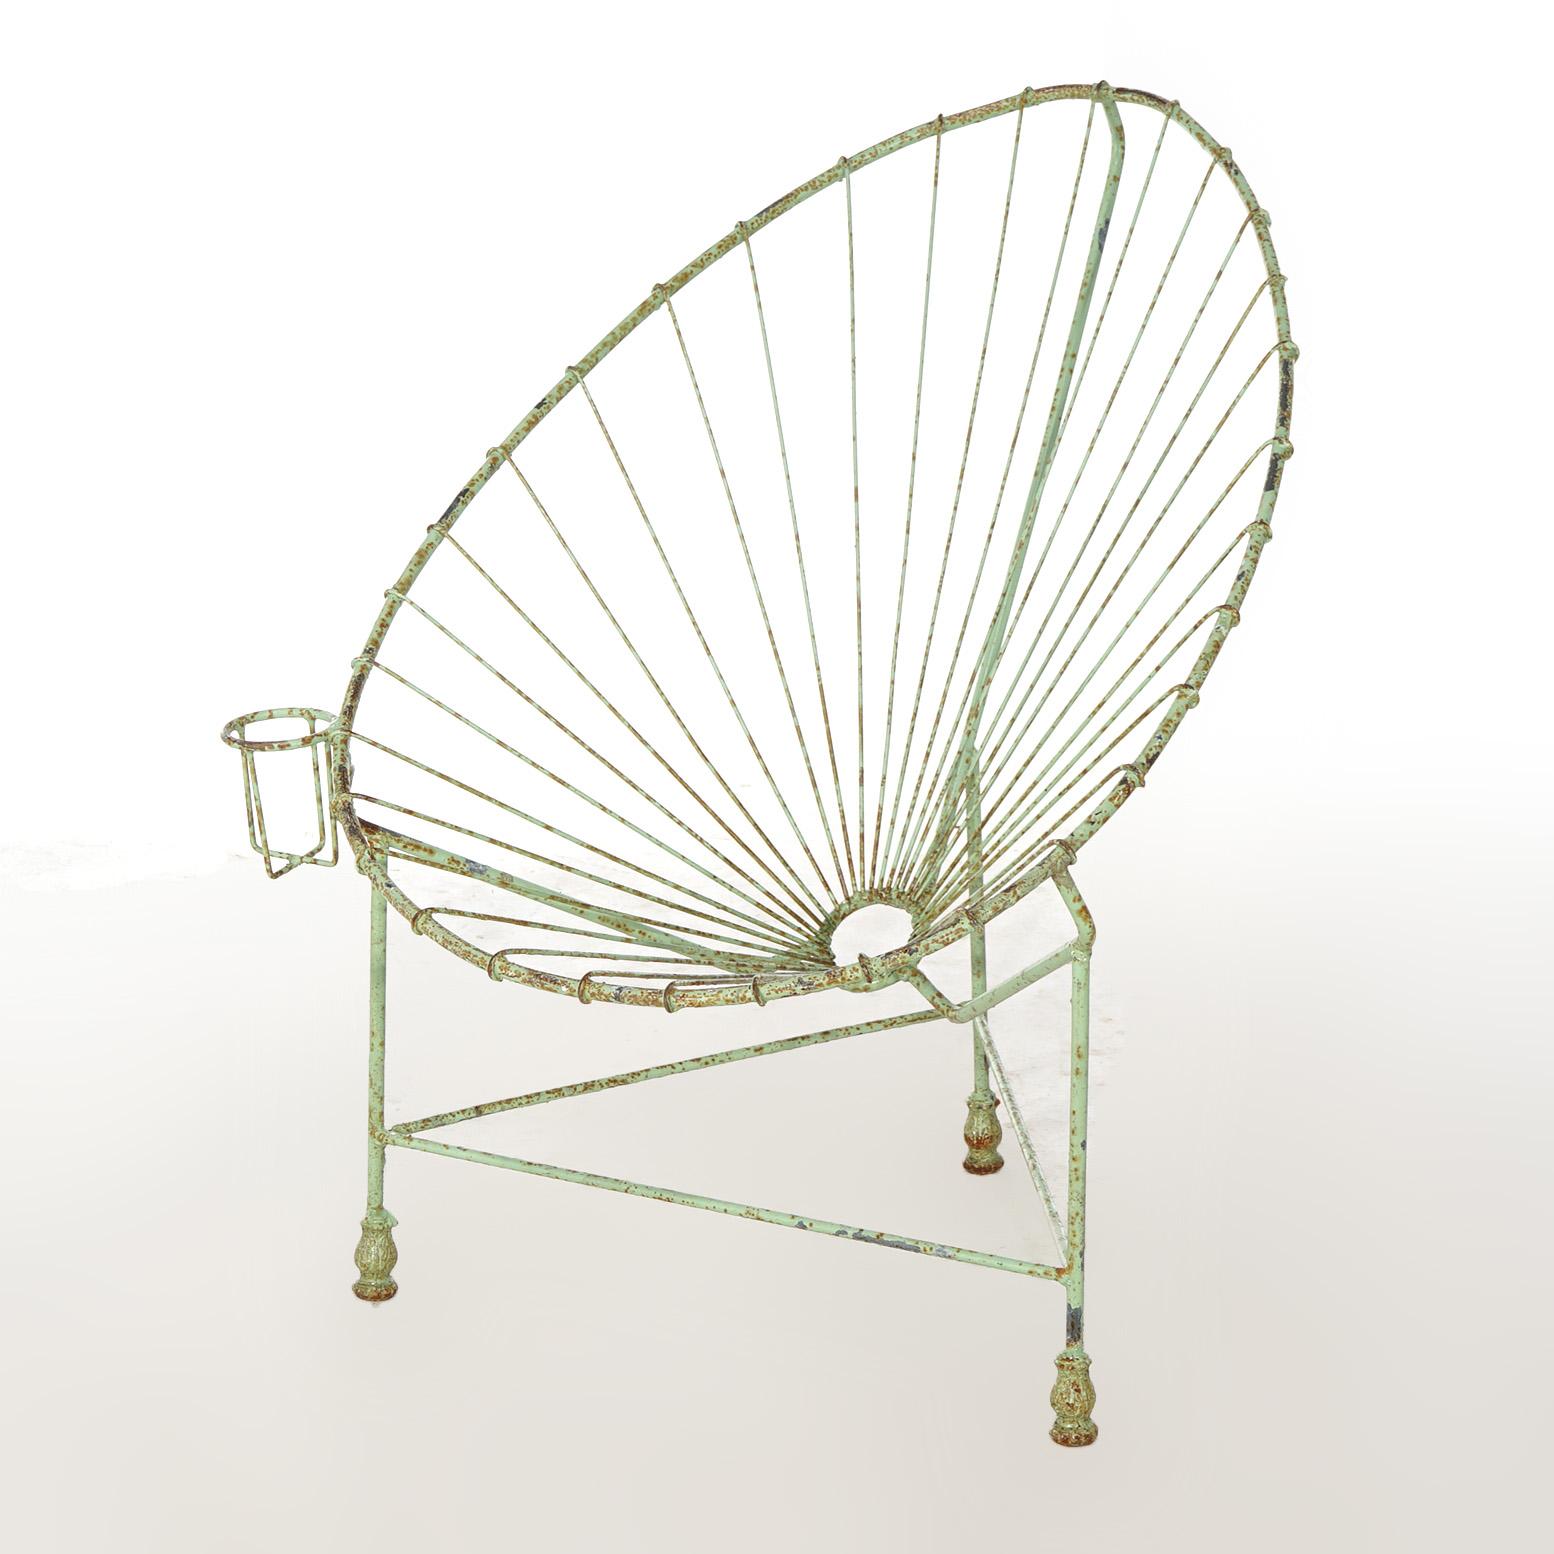 A Mid Century Modern egg garden chair offers painted wire construction with beverage holder, 20th century

Measures - 36